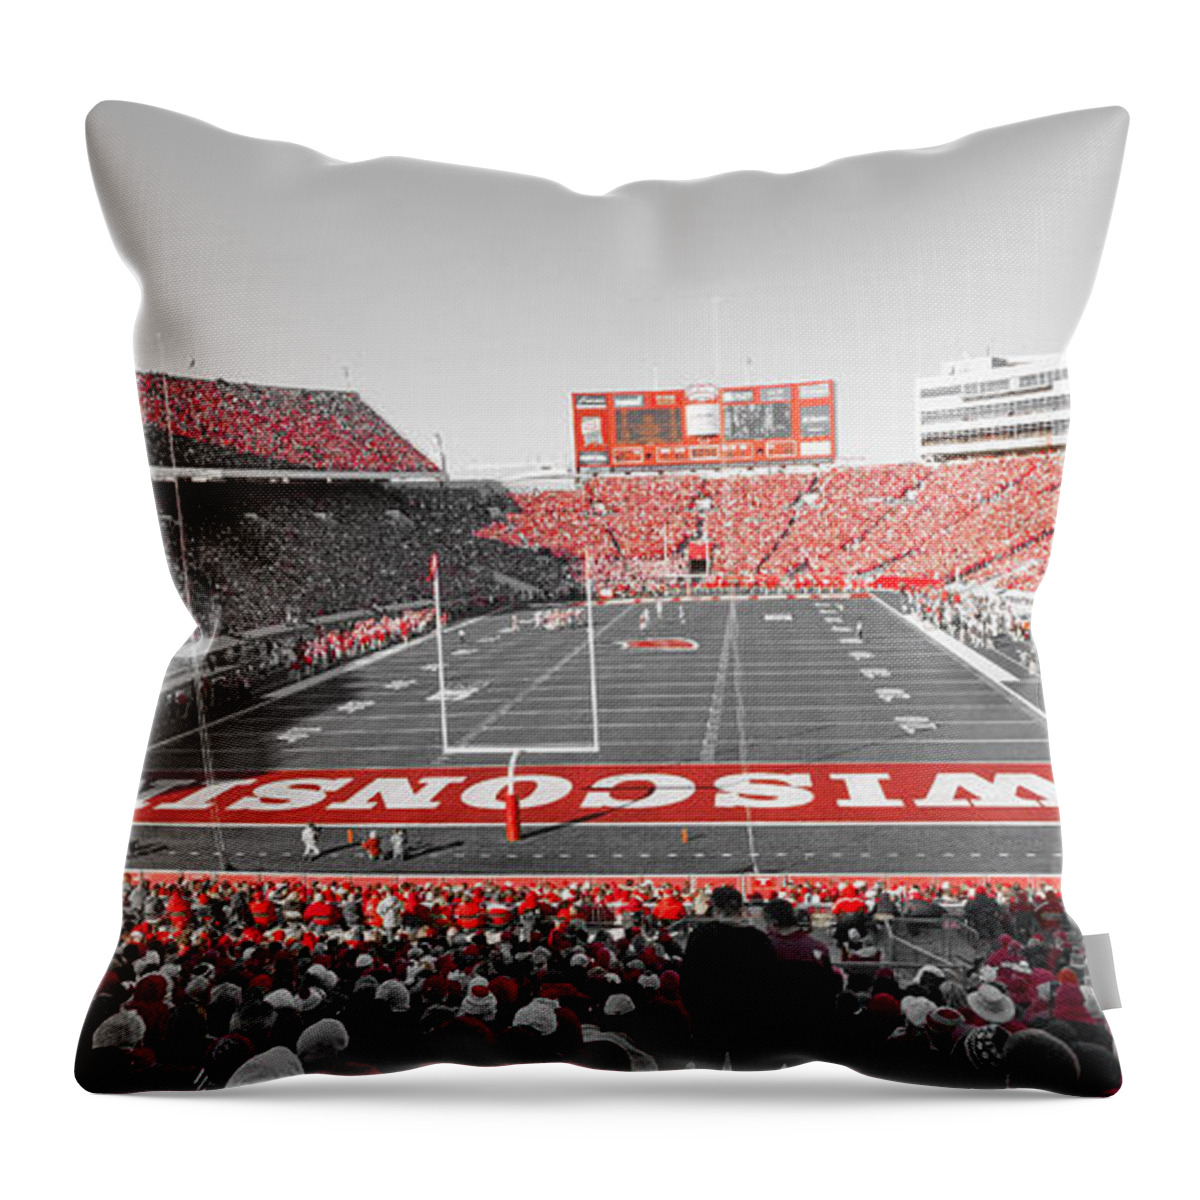 Wisconsin Throw Pillow featuring the photograph 0095 Badger Football by Steve Sturgill